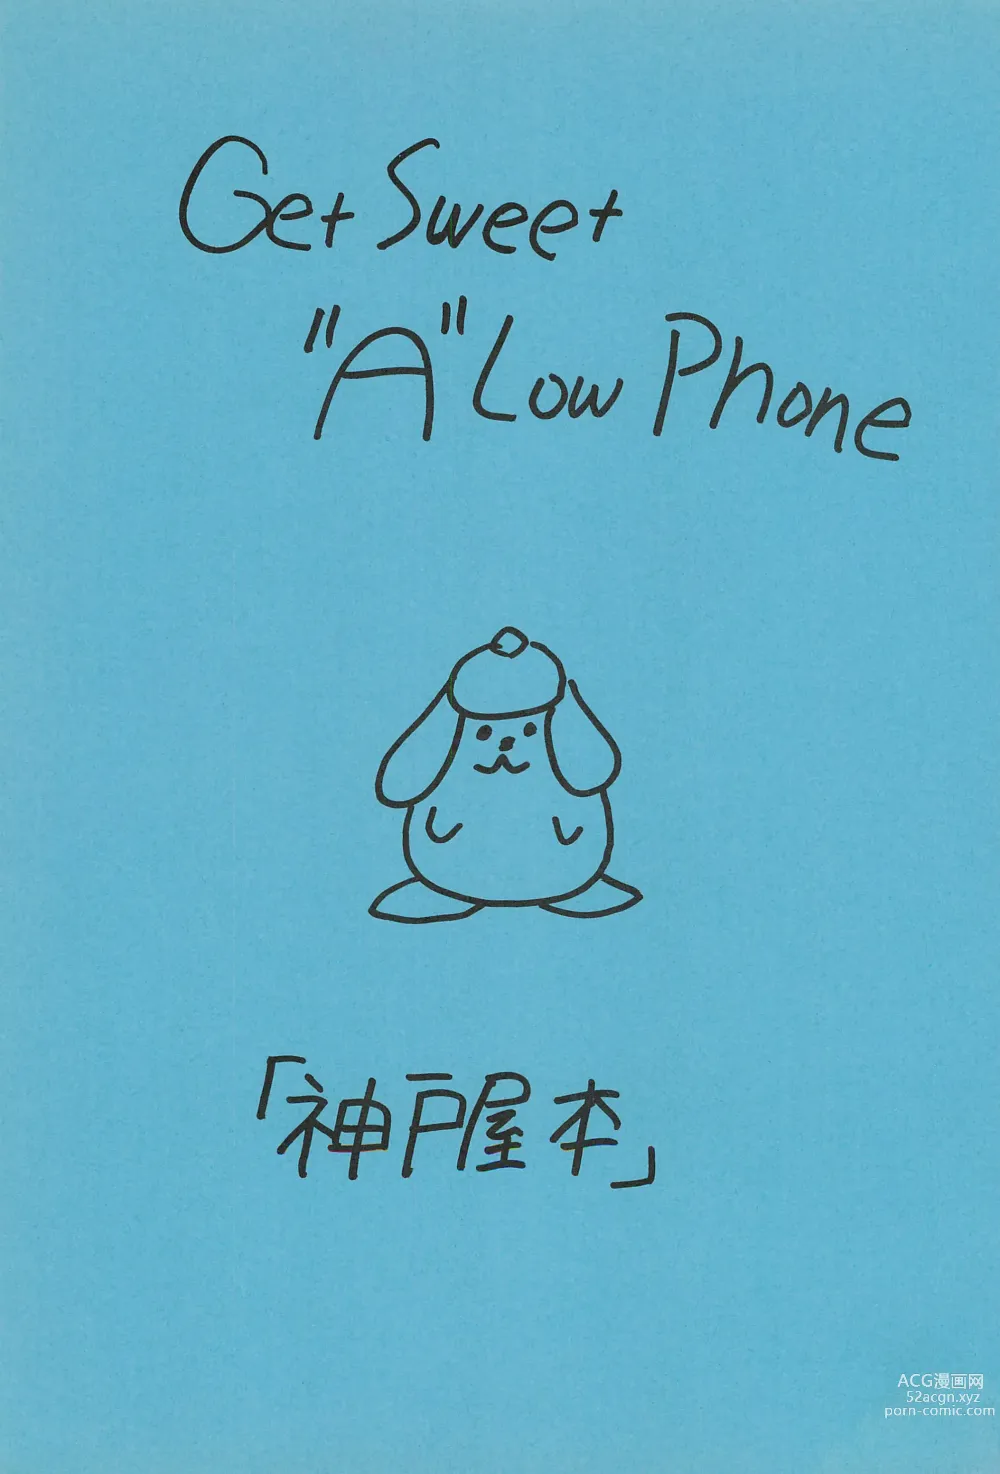 Page 3 of doujinshi Get Sweet ”A” Low Phone